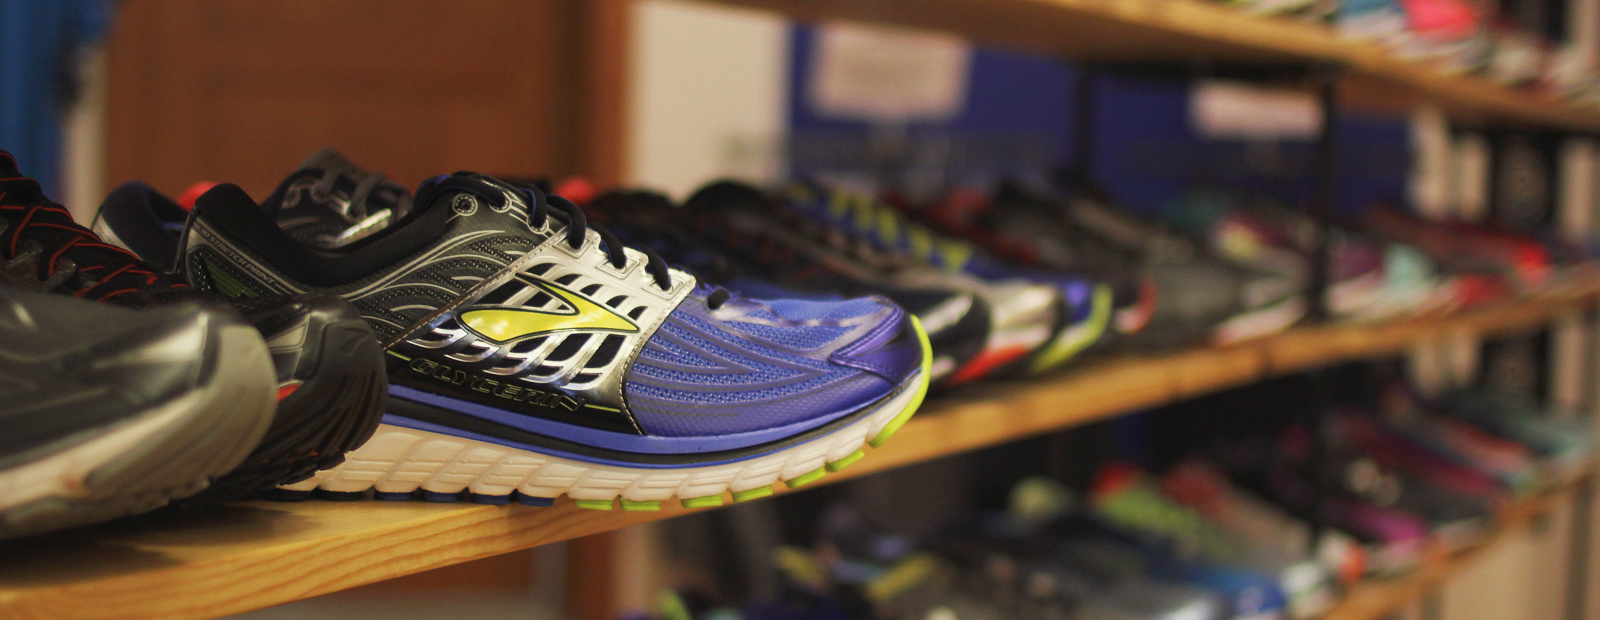 The right shoes can make all the difference to running in comfort.